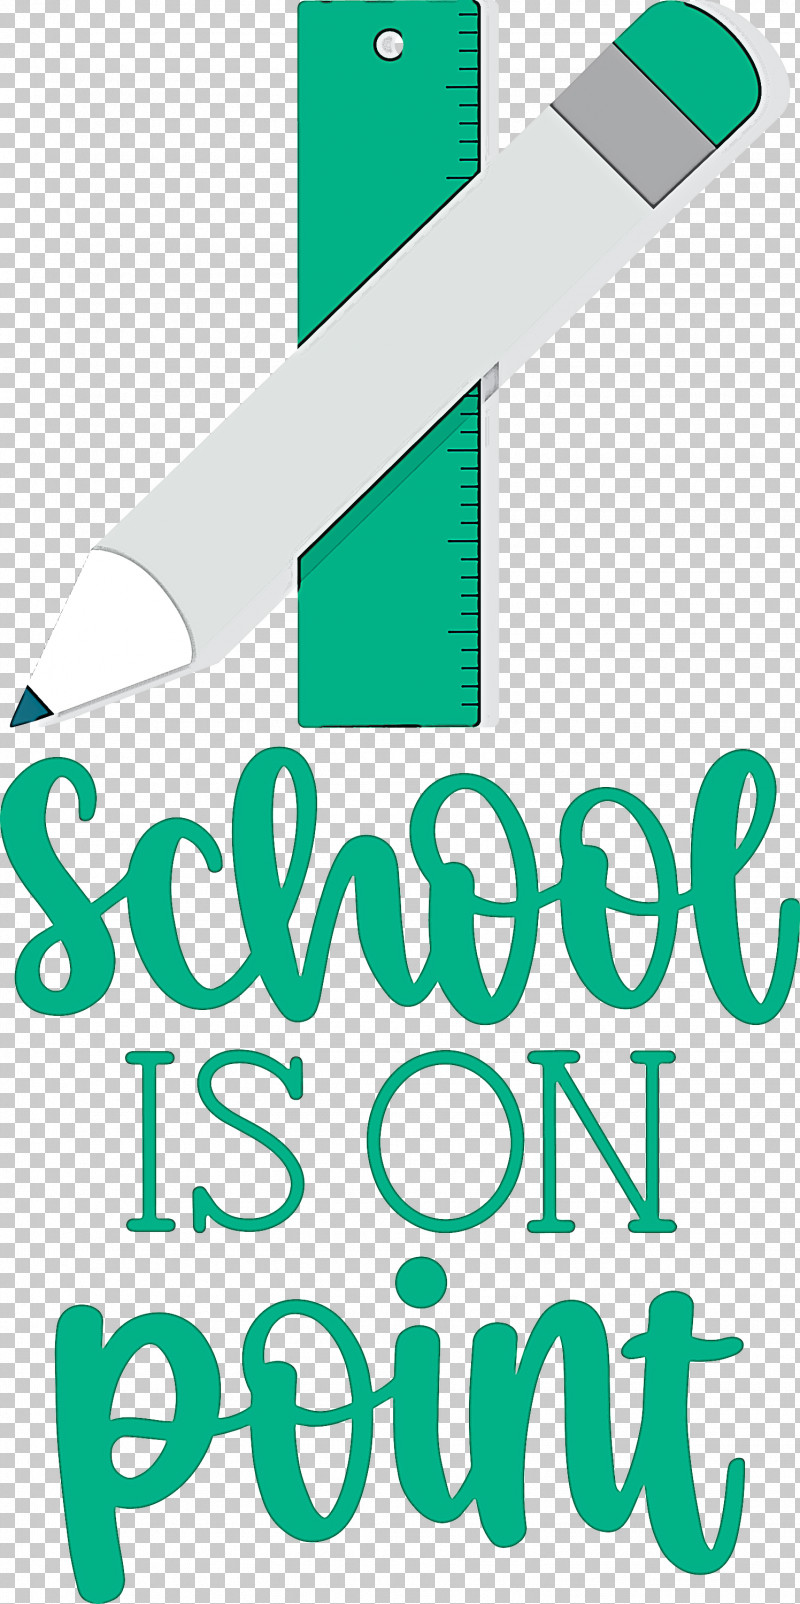 School Is On Point School Education PNG, Clipart, Education, Geometry, Green, Line, Logo Free PNG Download